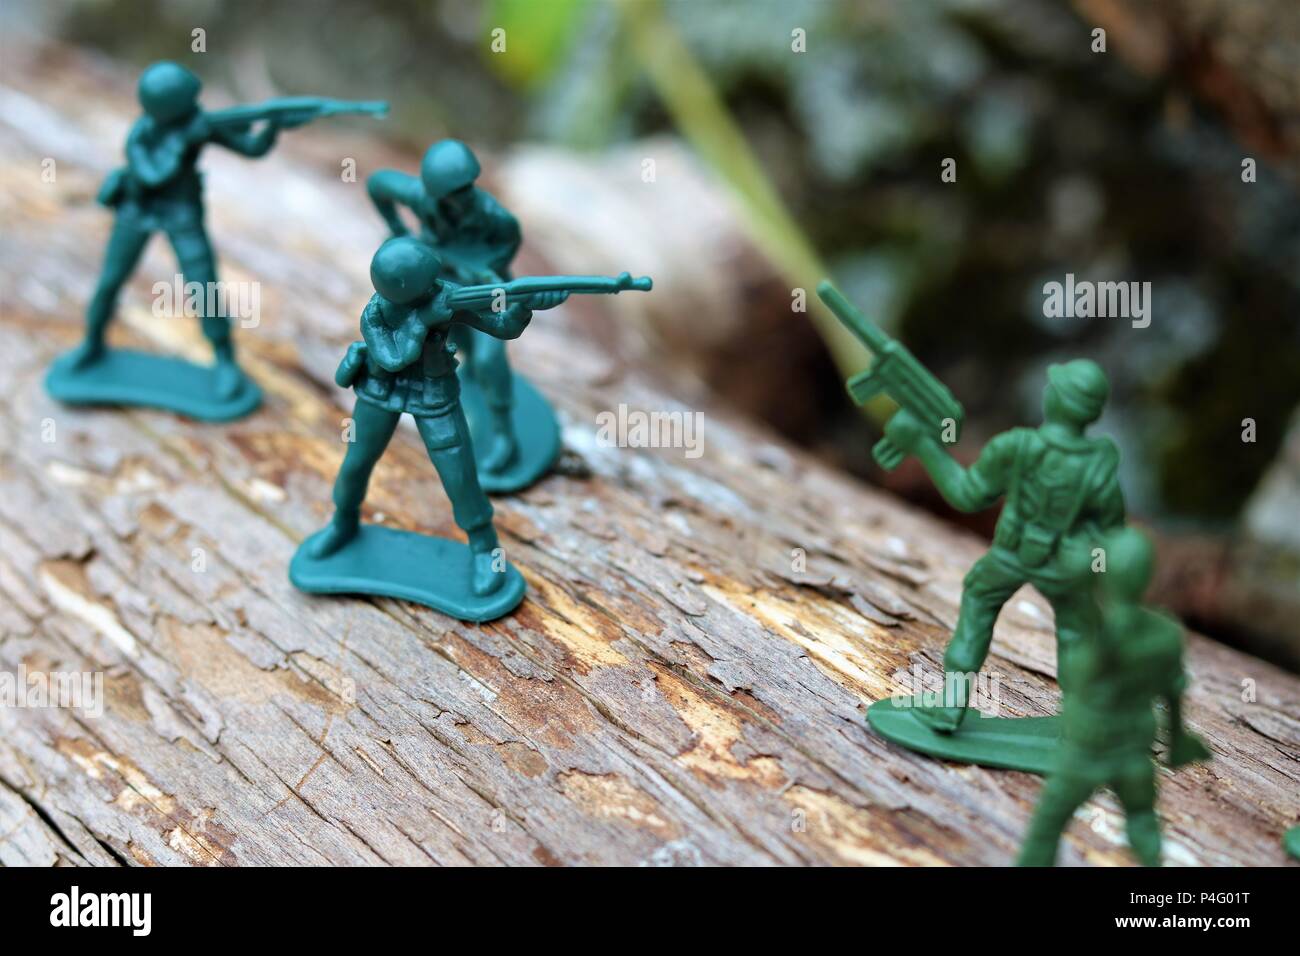 Plastic toy soldiers showing a battle scene - News Concept Stock Photo